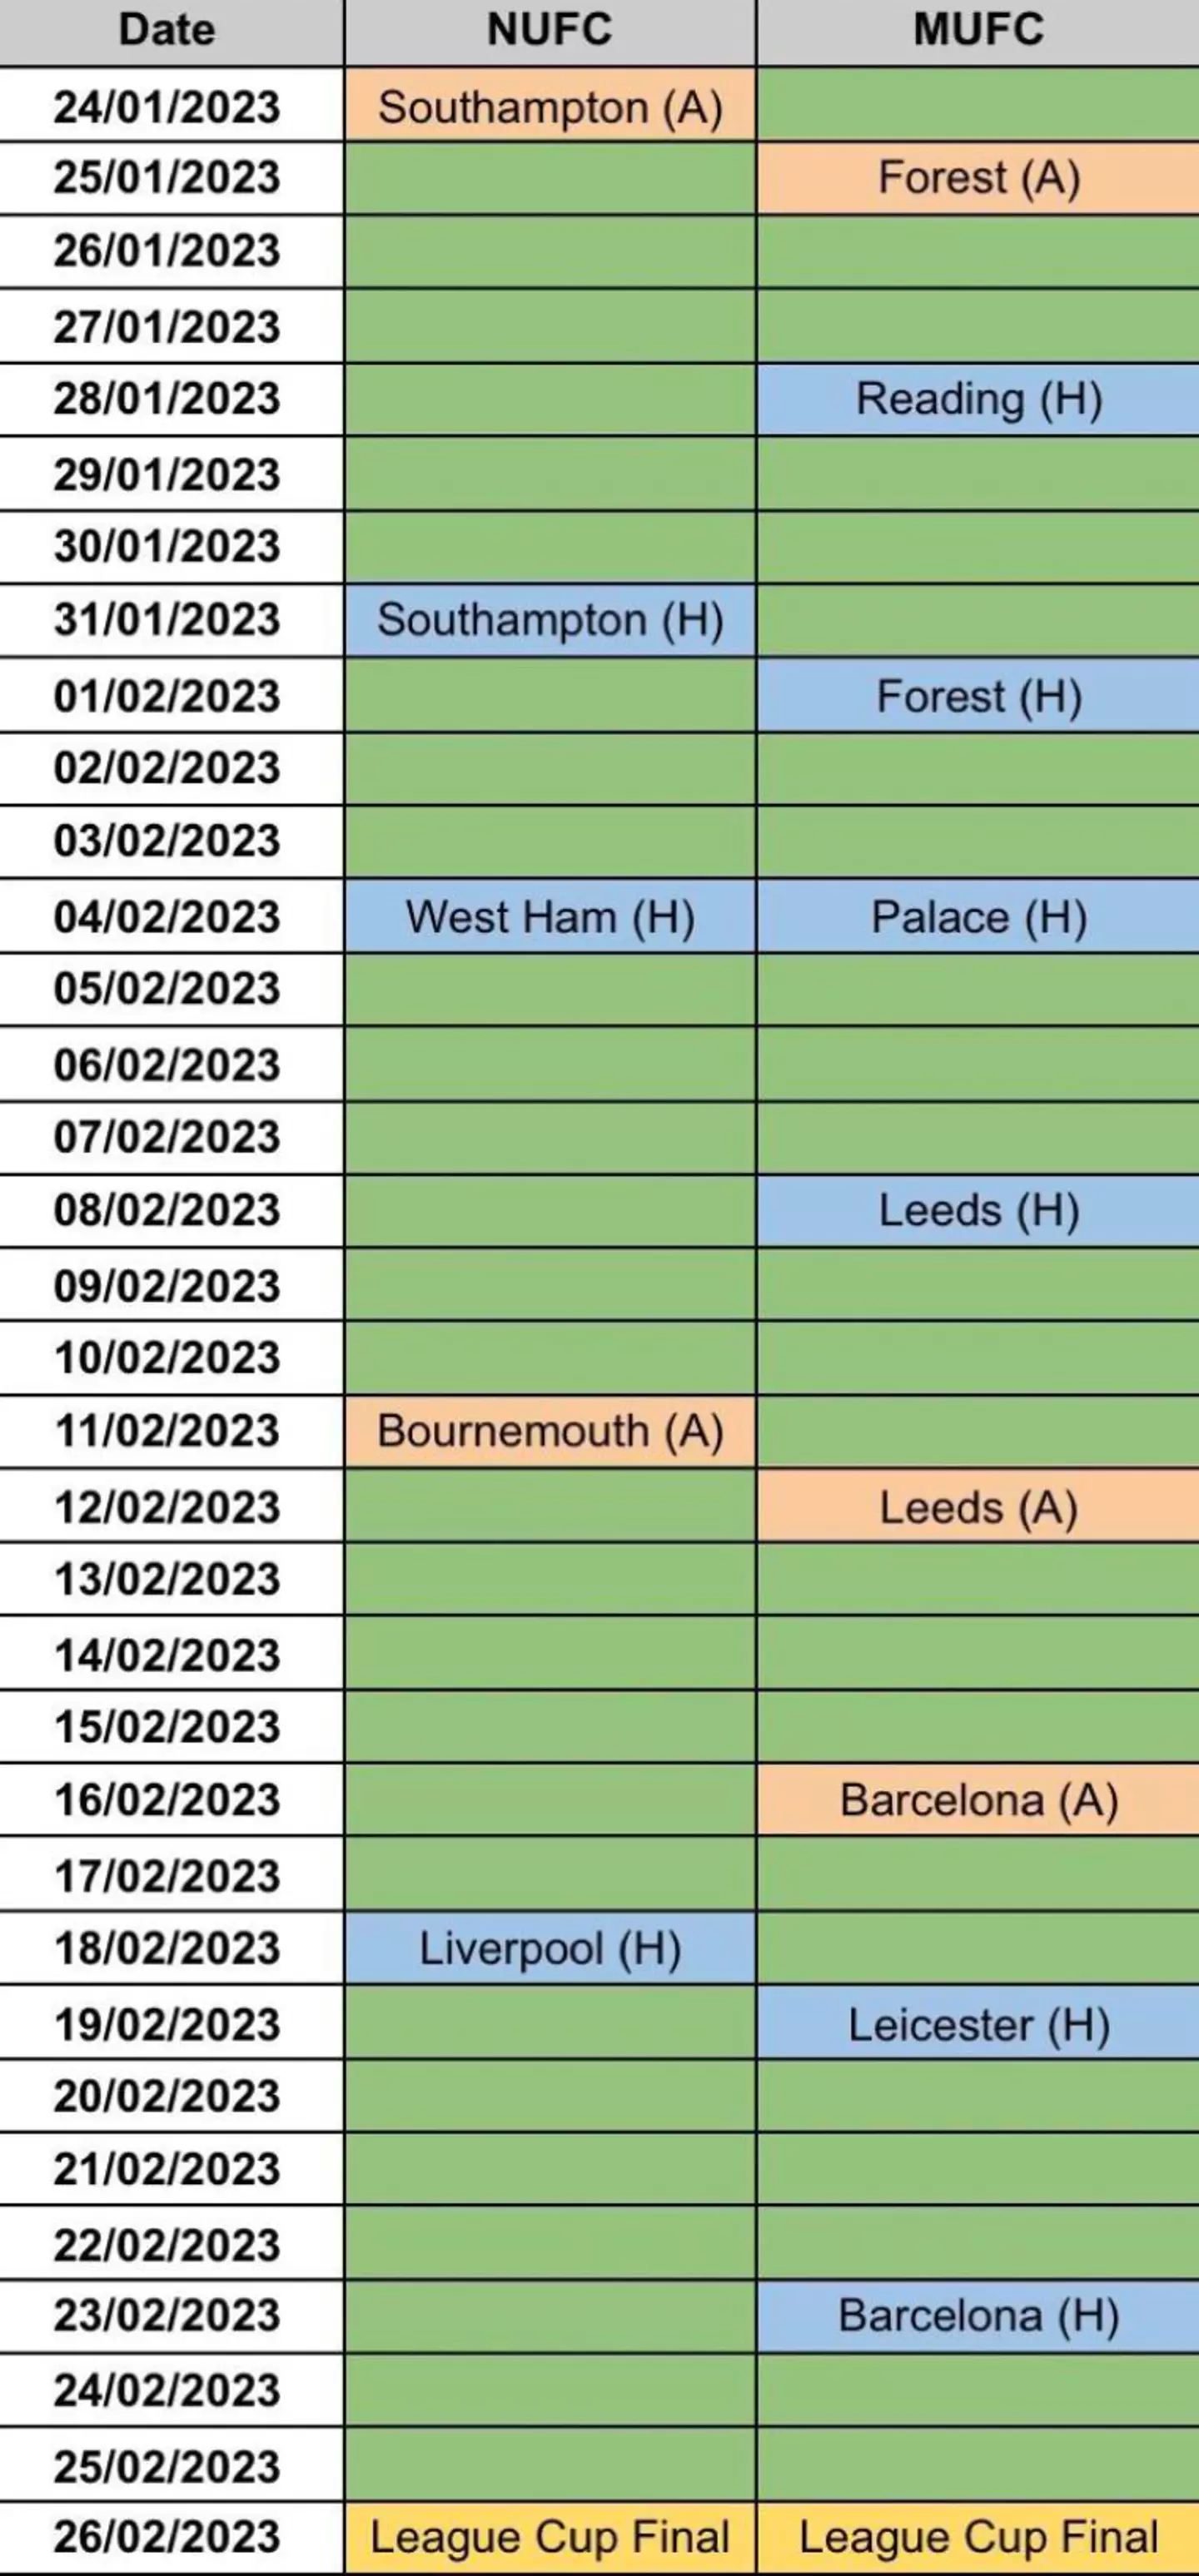 The fixture lists in full. (Image